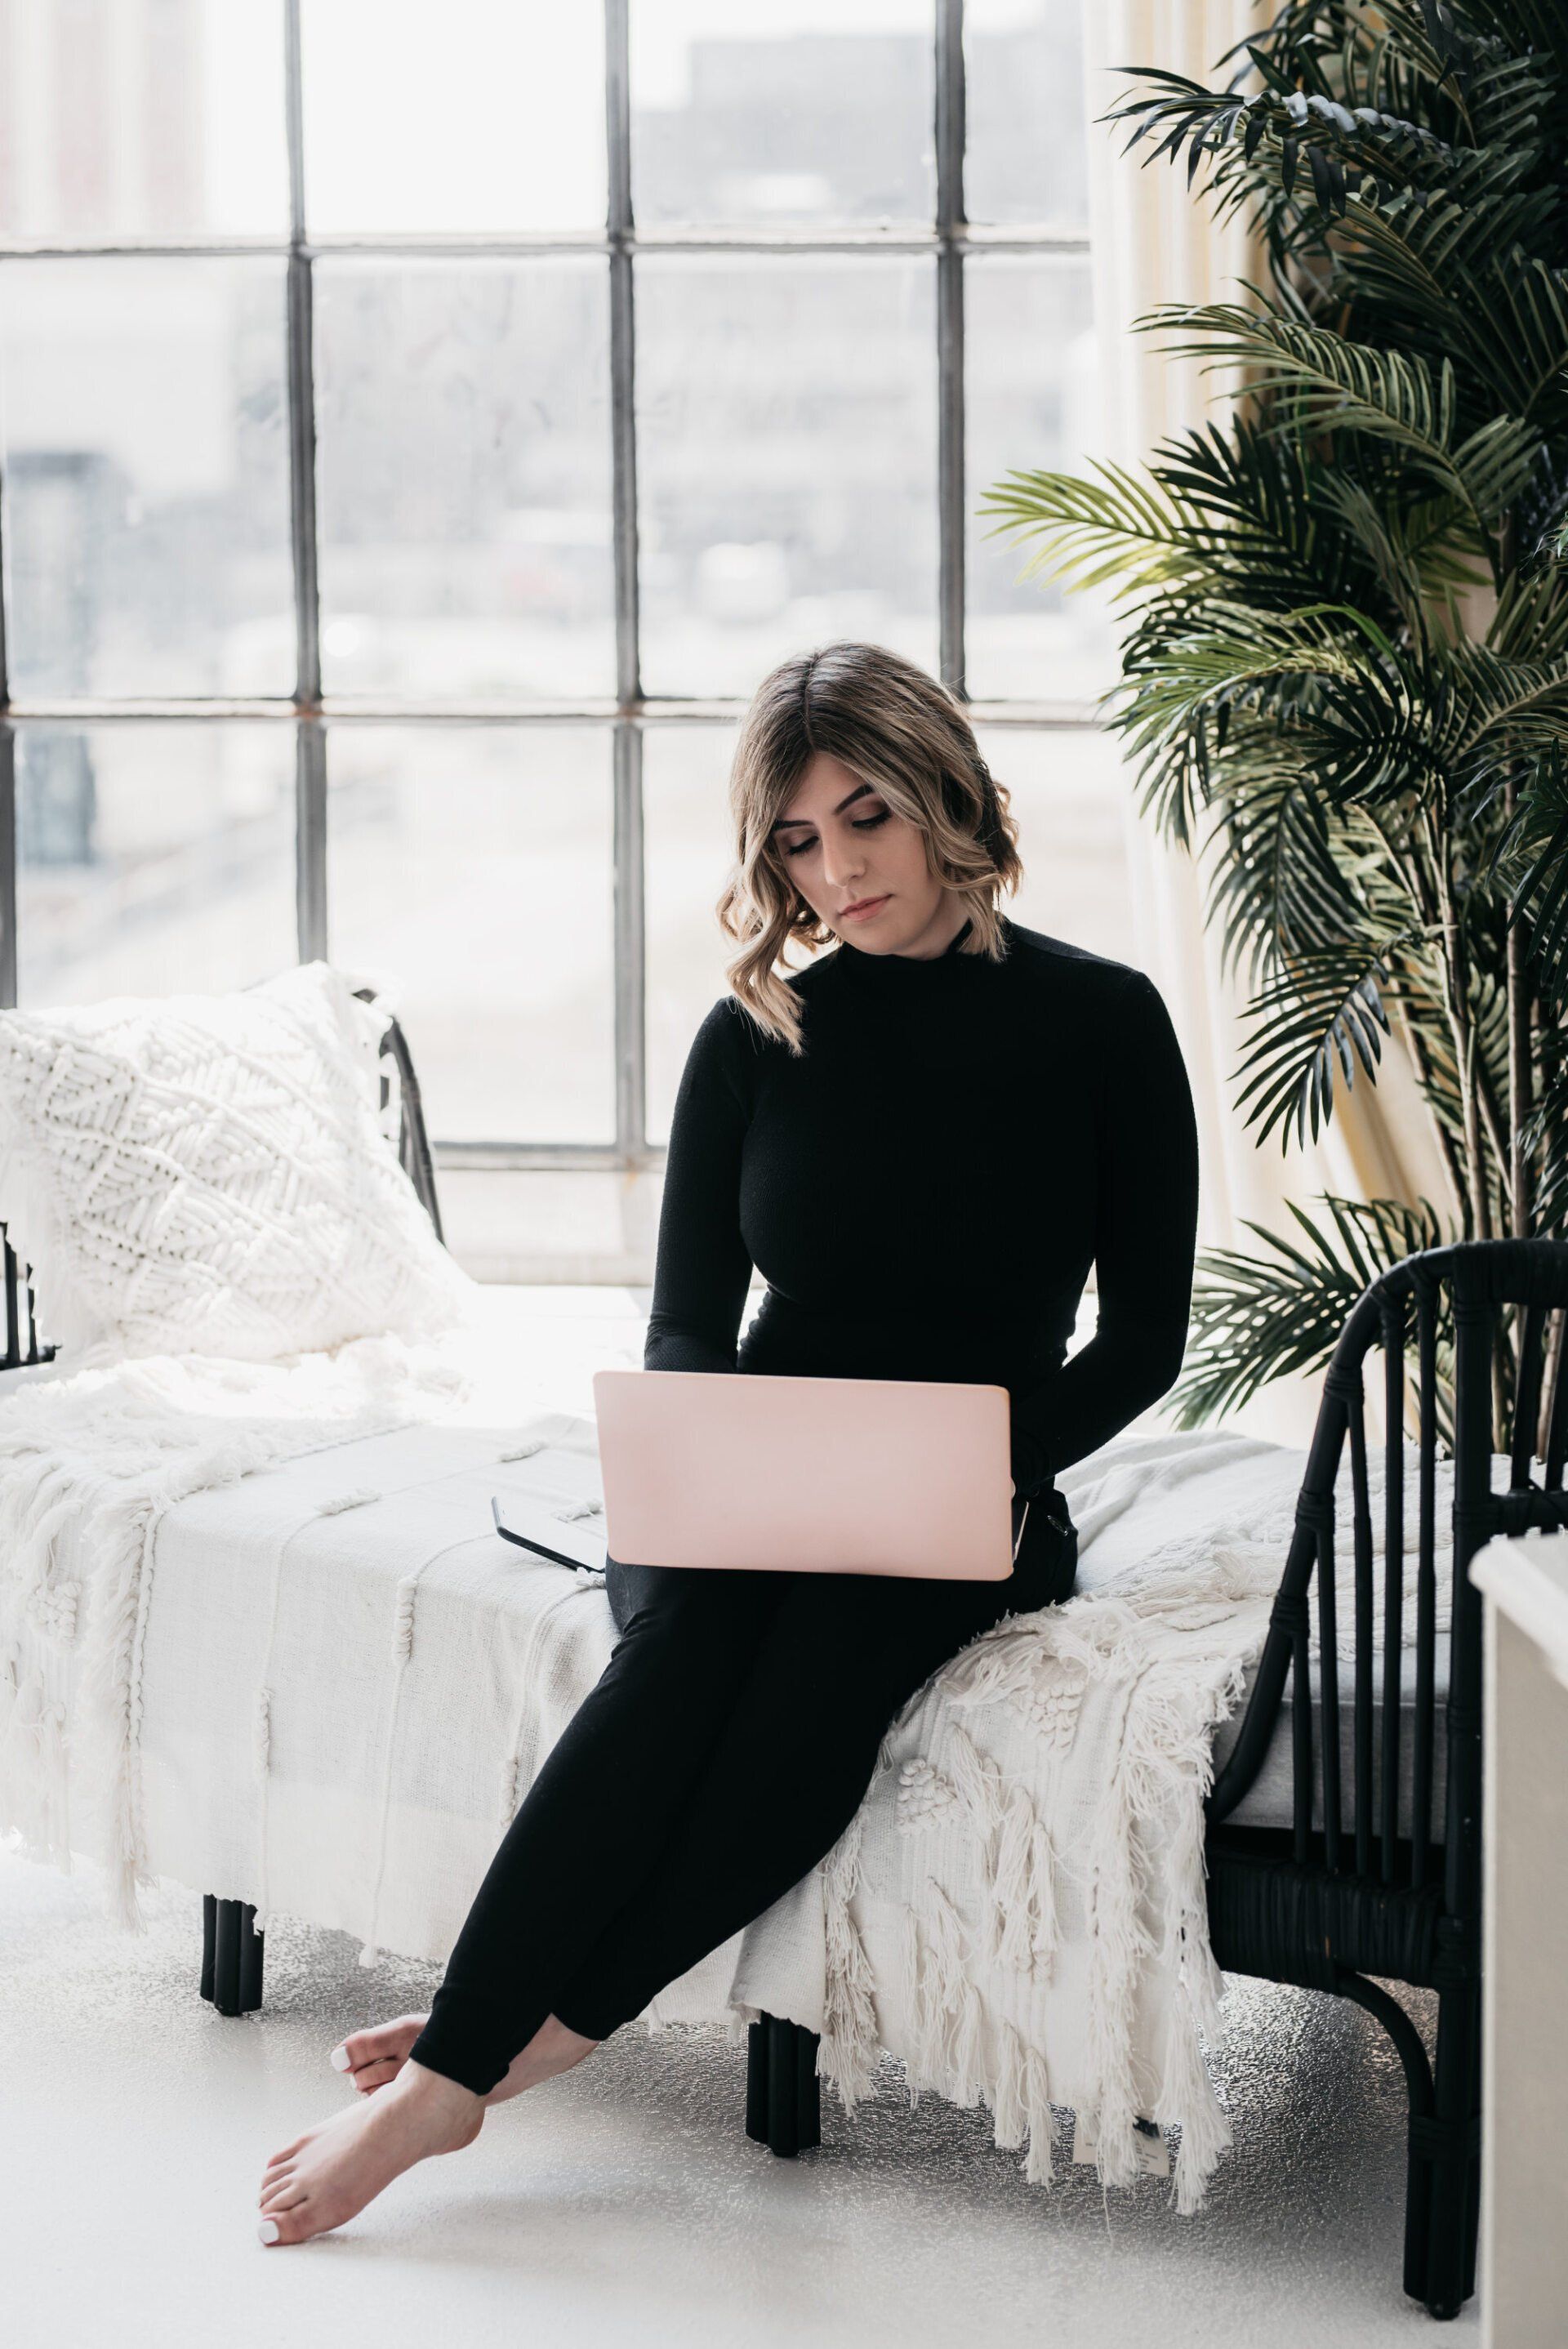 woman dressed in black pants and top, sitting on the side of a bed in an all-white room while working on a laptop